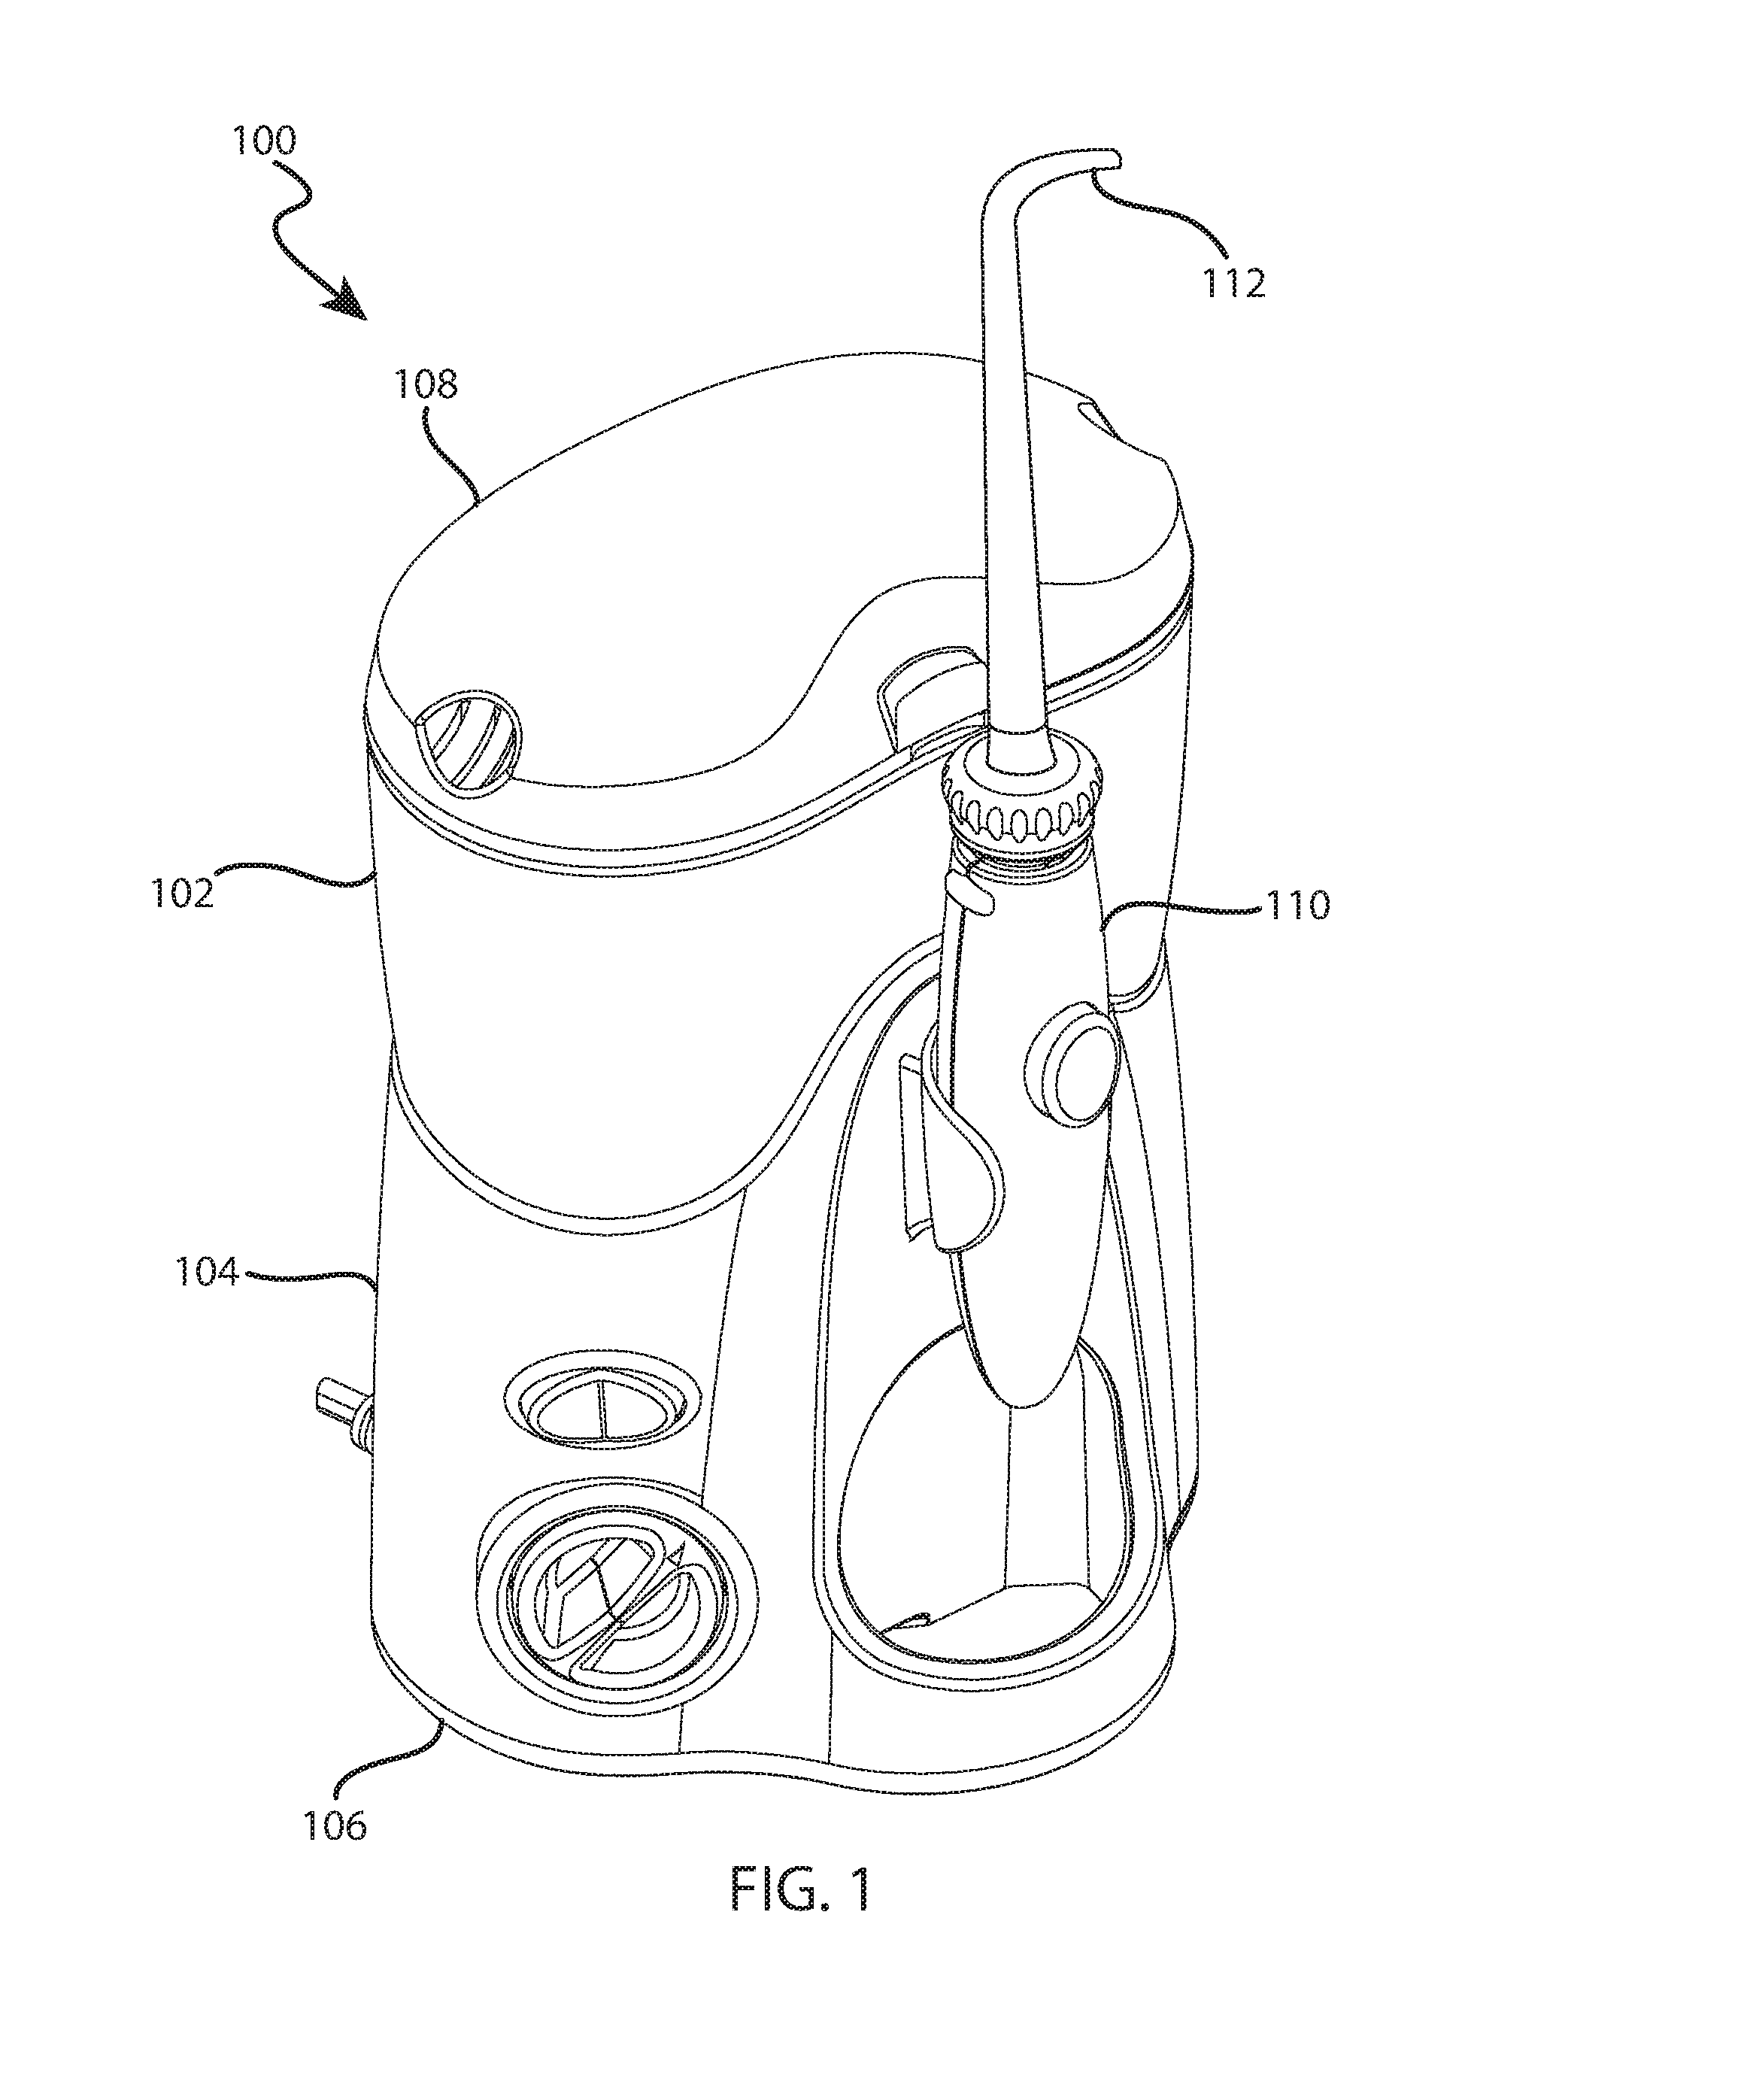 Force exerting assembly for oral irrigating device